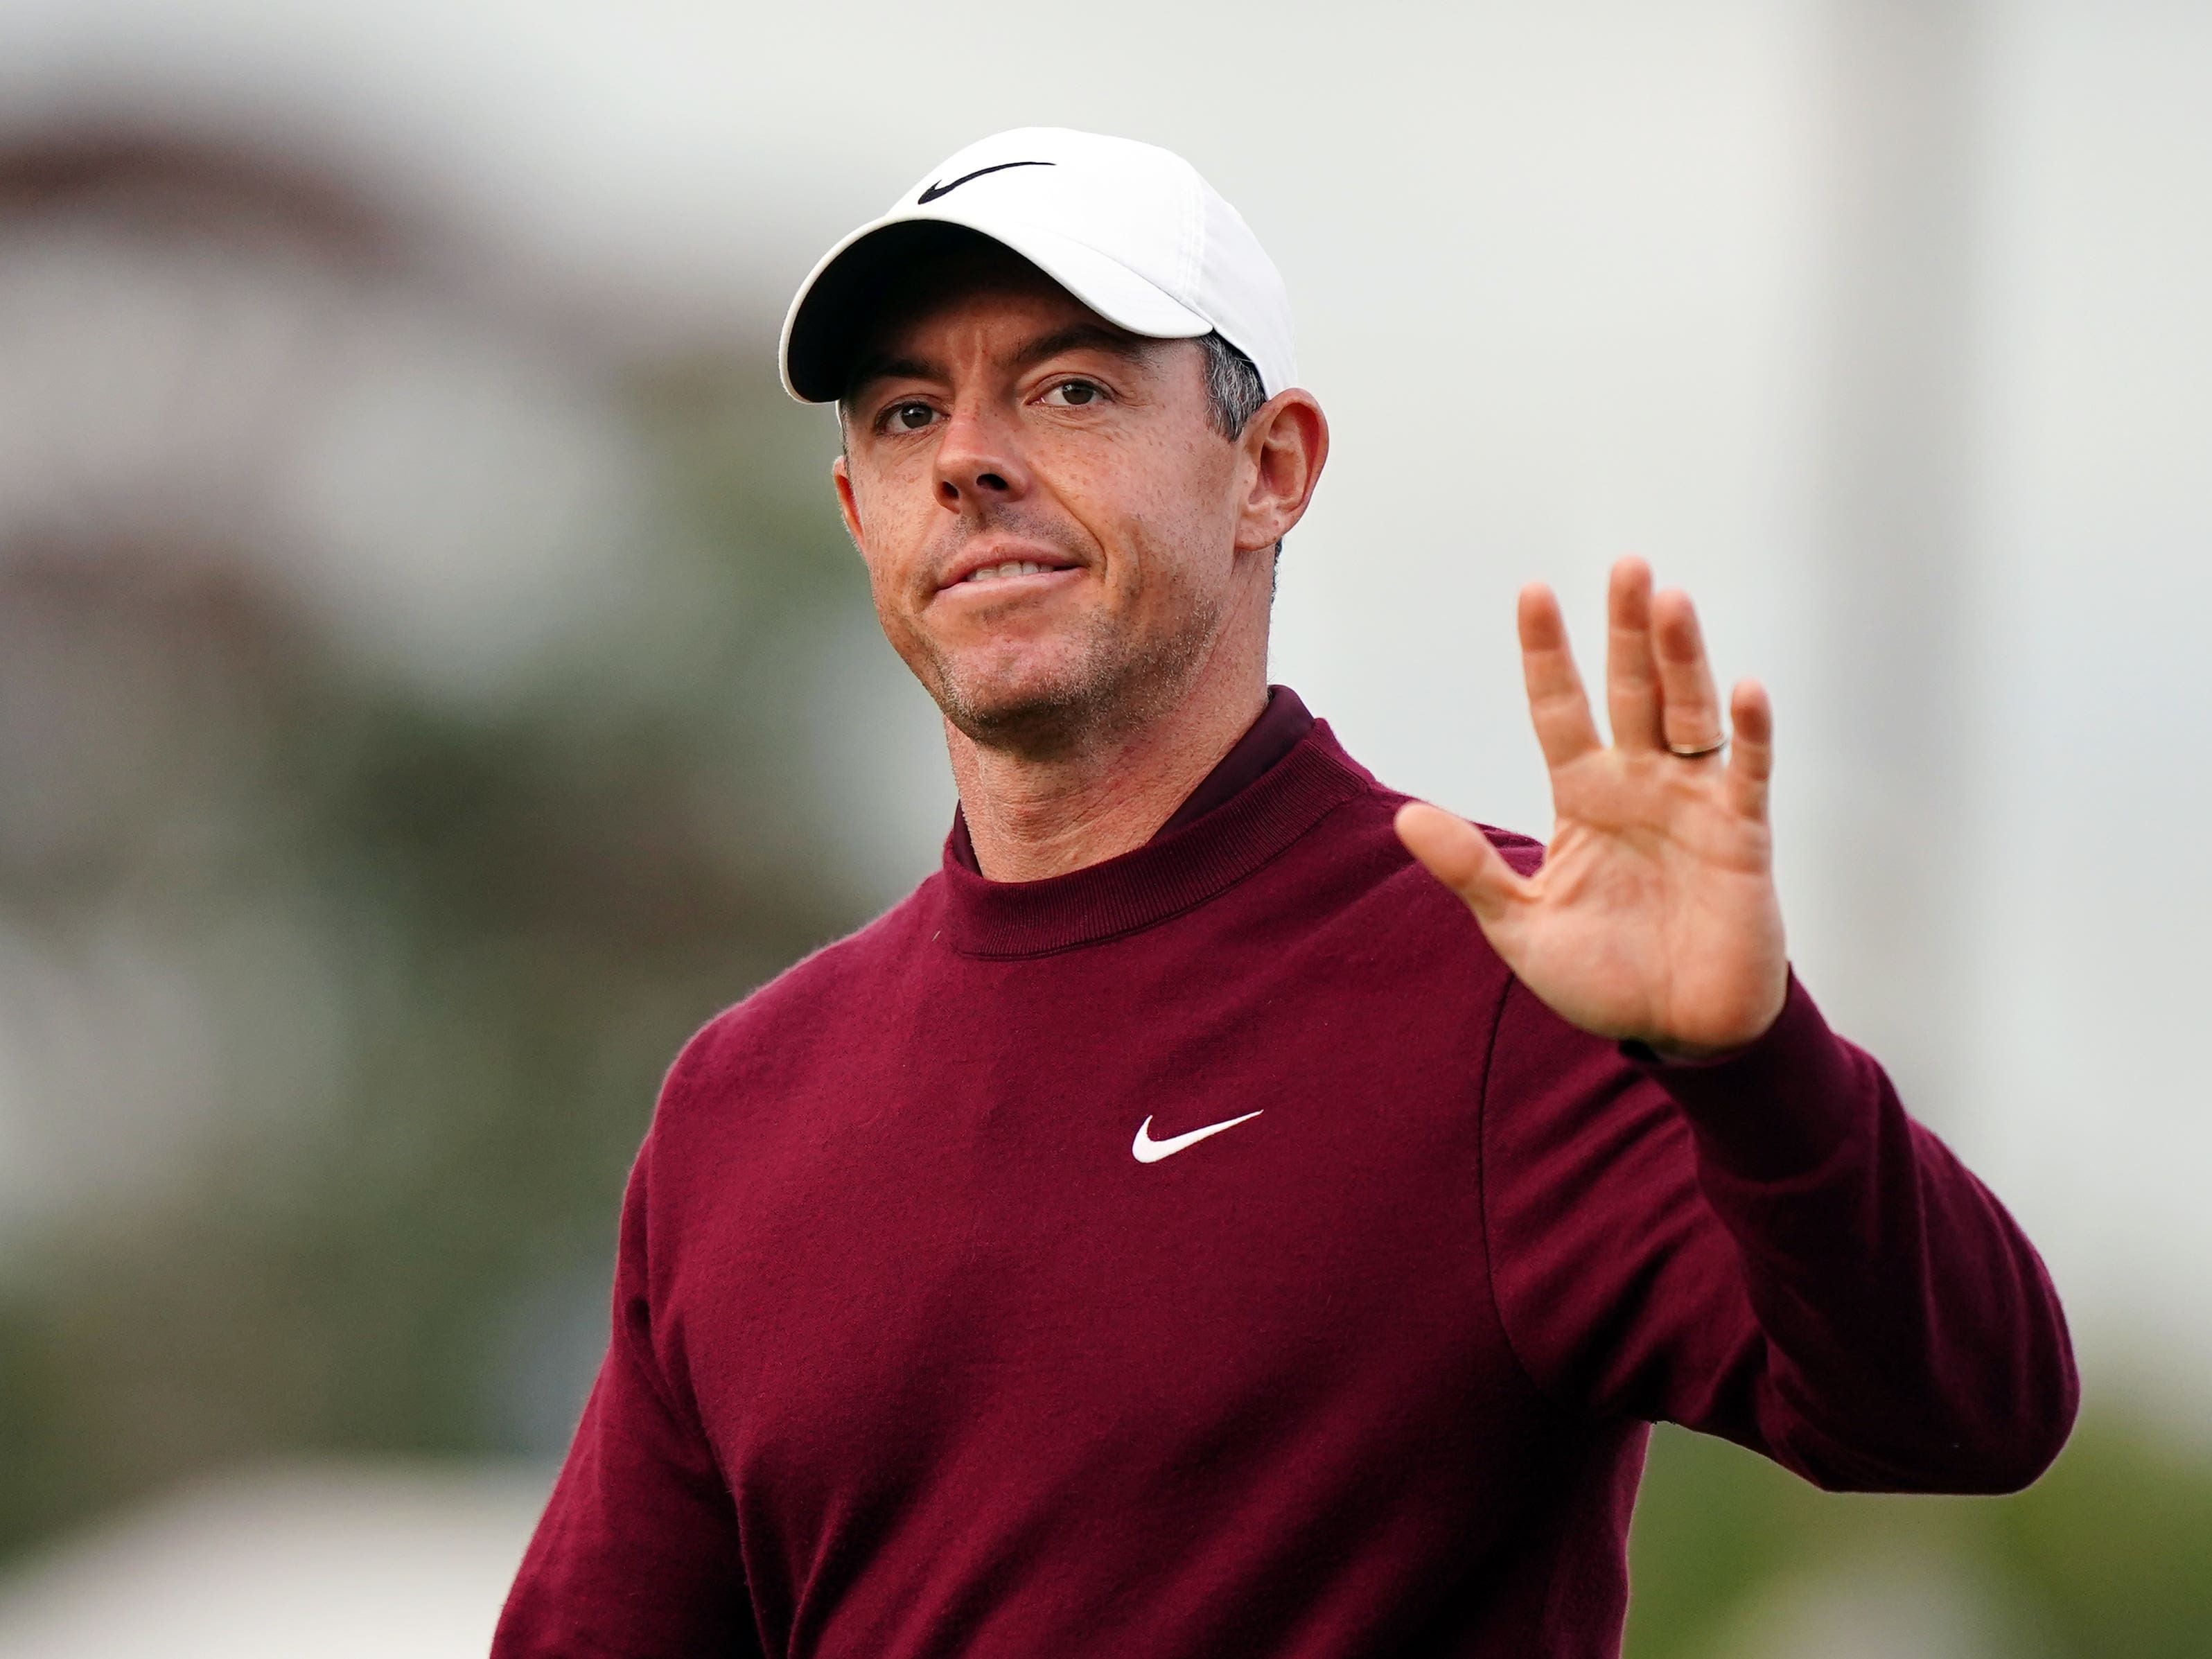 Rory McIlroy says he was beaten by wind at Troon as hunt for fifth major goes on